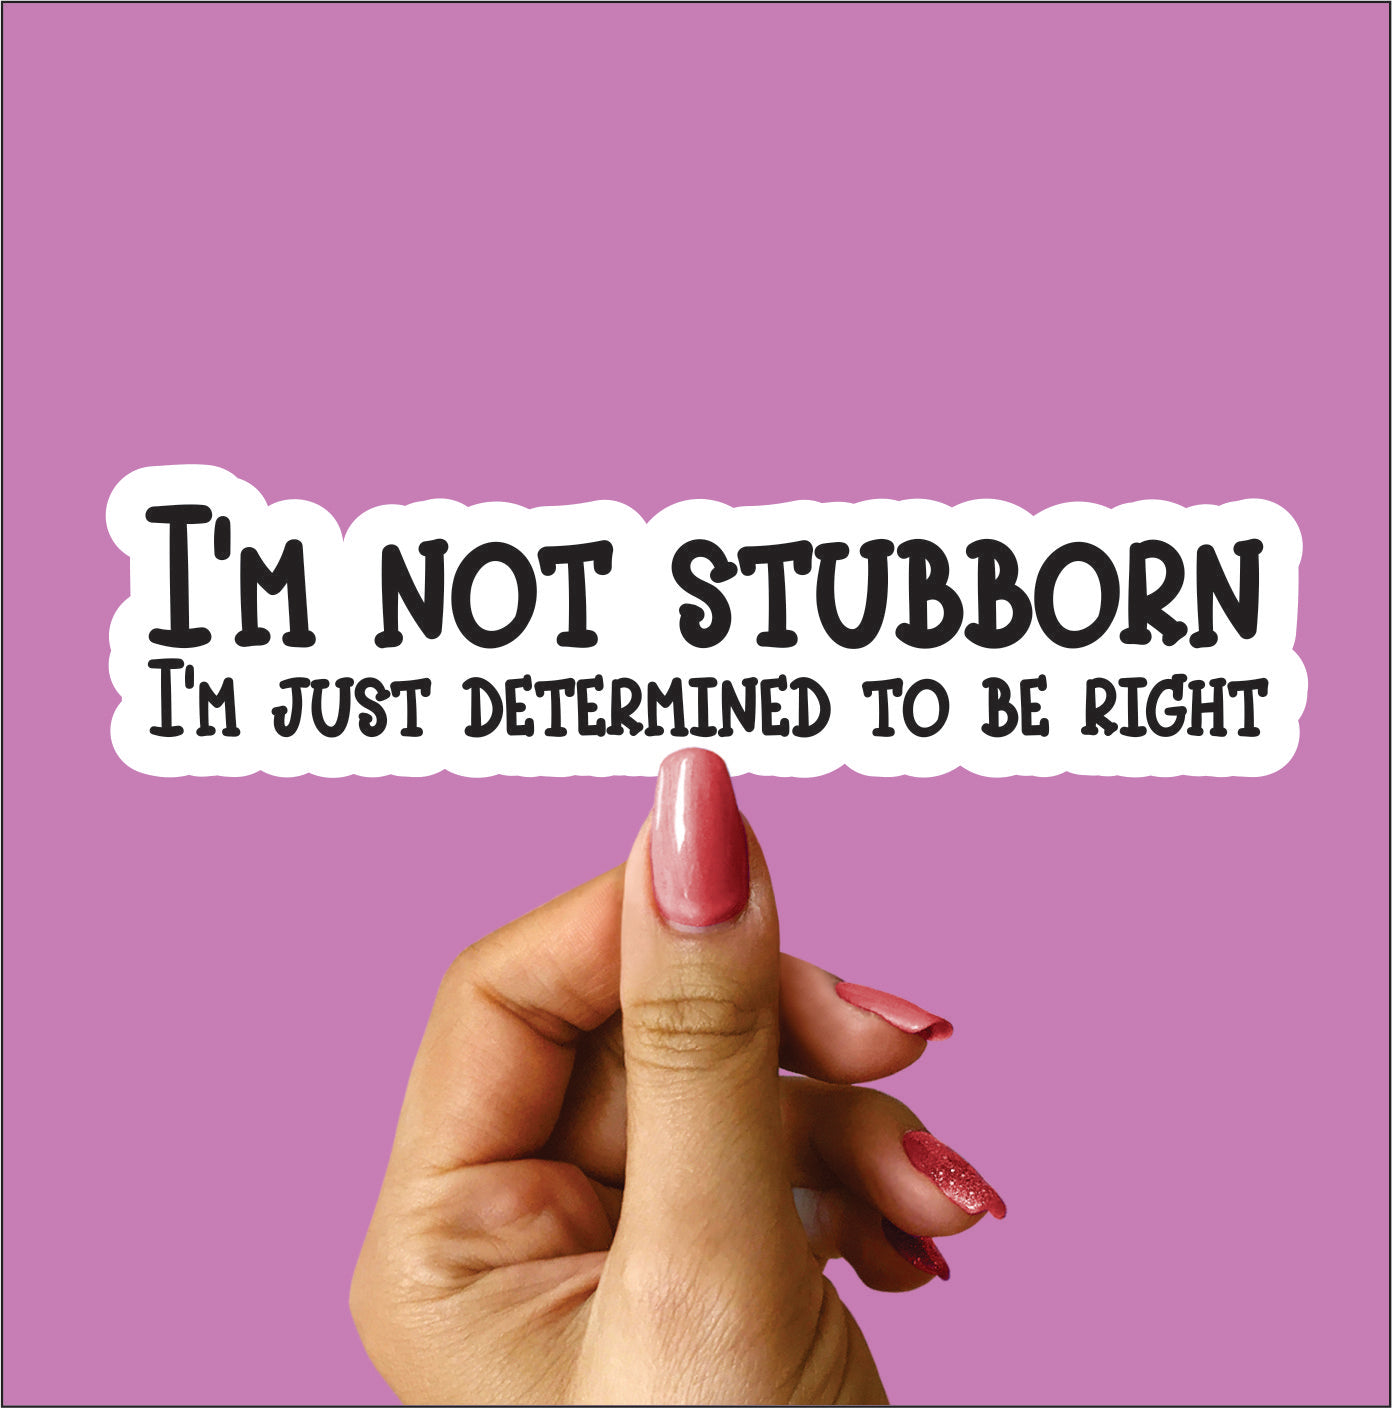 I’m not stubborn, I’m just determined to be right Sticker Vinyl